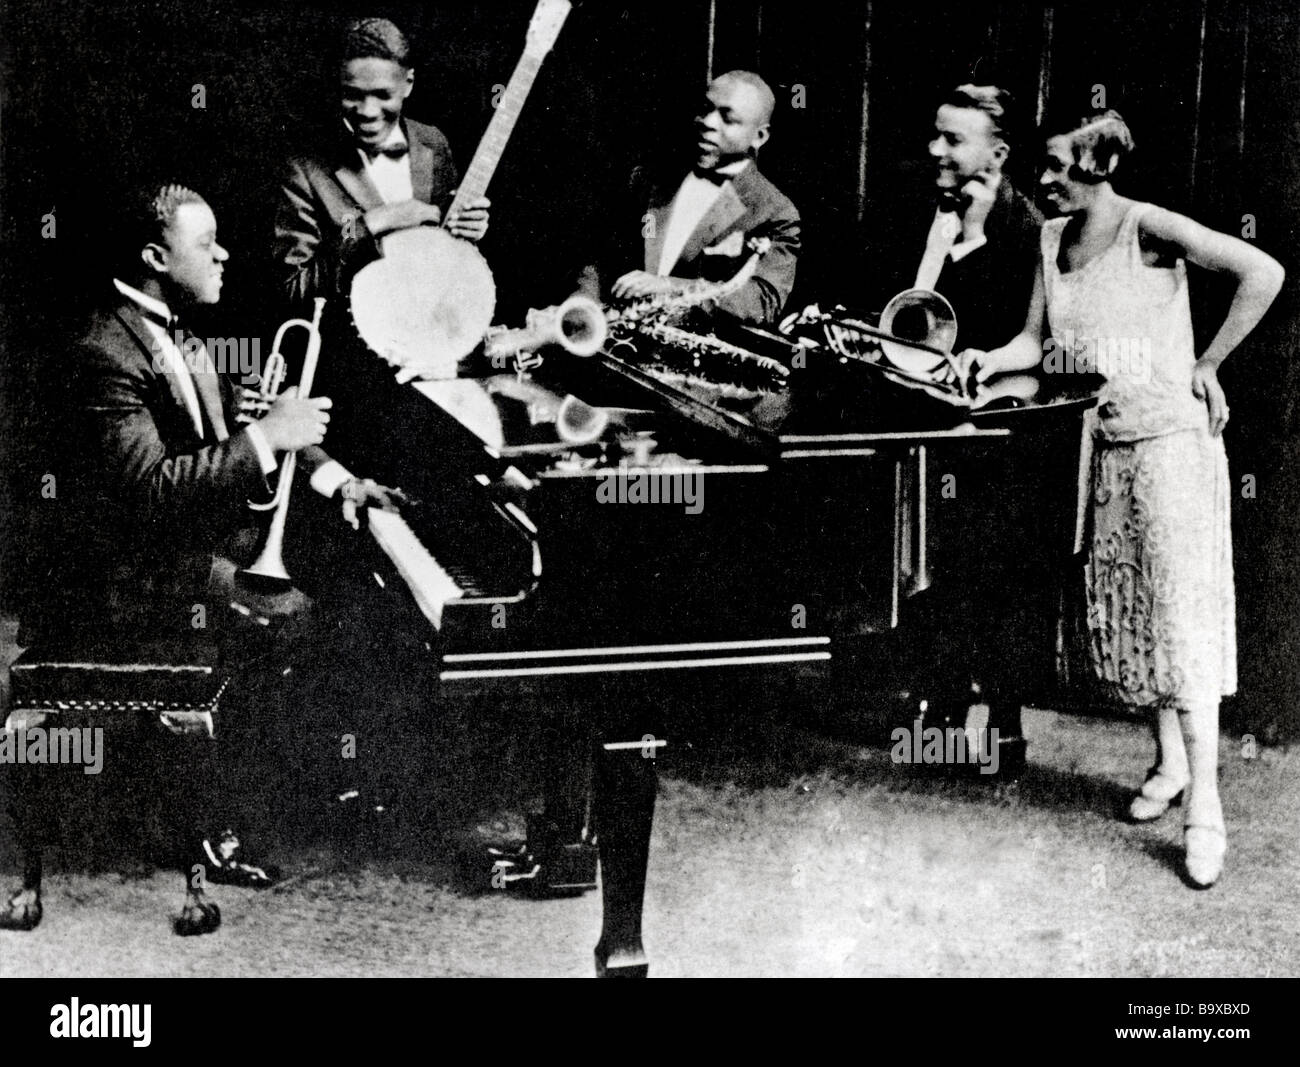 KING CREOLE'S JAZZ BAND in 1922 - see Description below for details Stock Photo